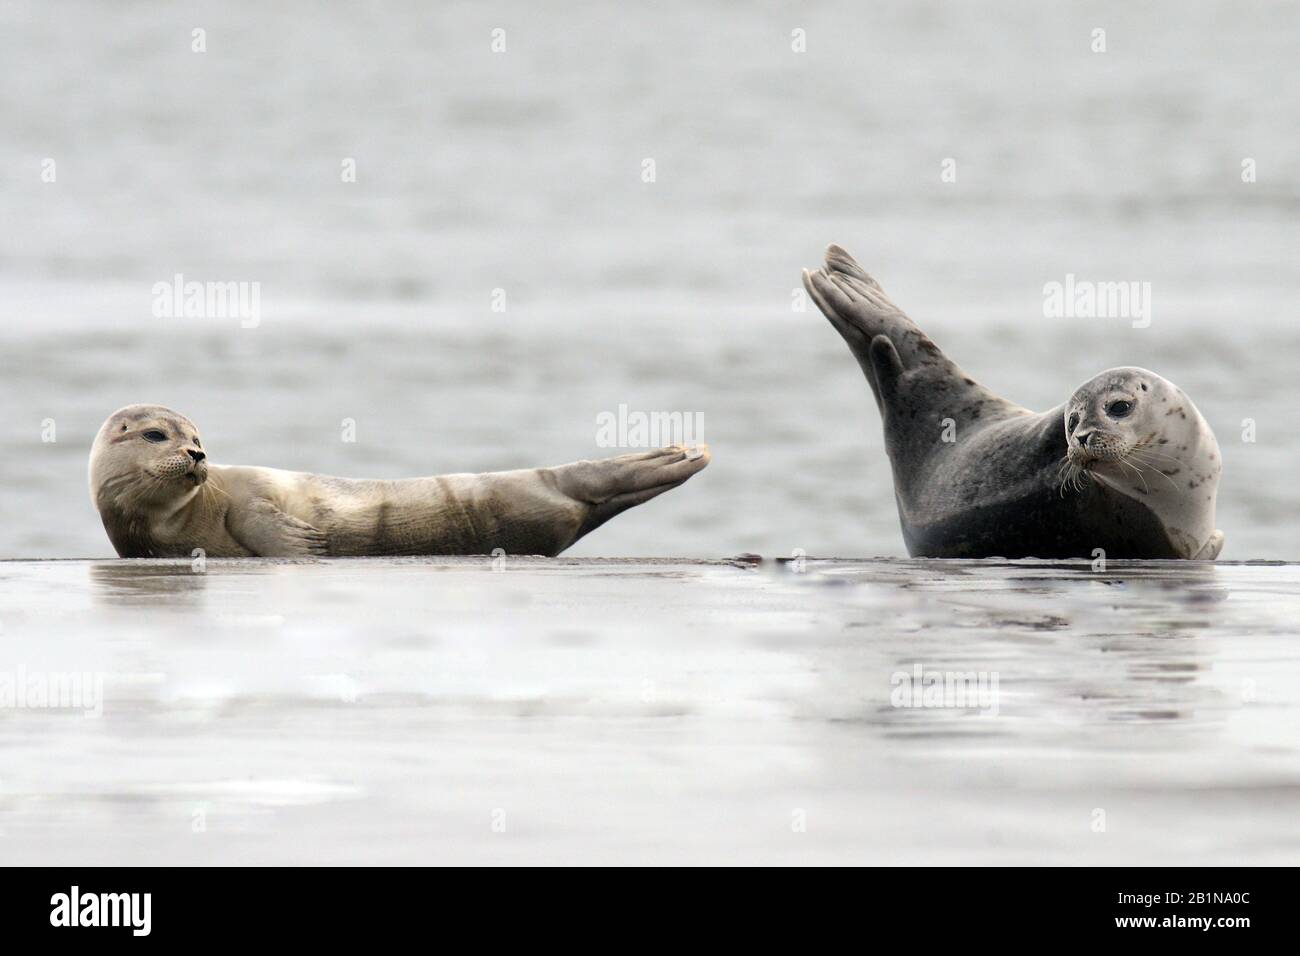 harbor seal, common seal (Phoca vitulina), two habour seals on a sandbank in the water, Netherlands, Den Helder Stock Photo